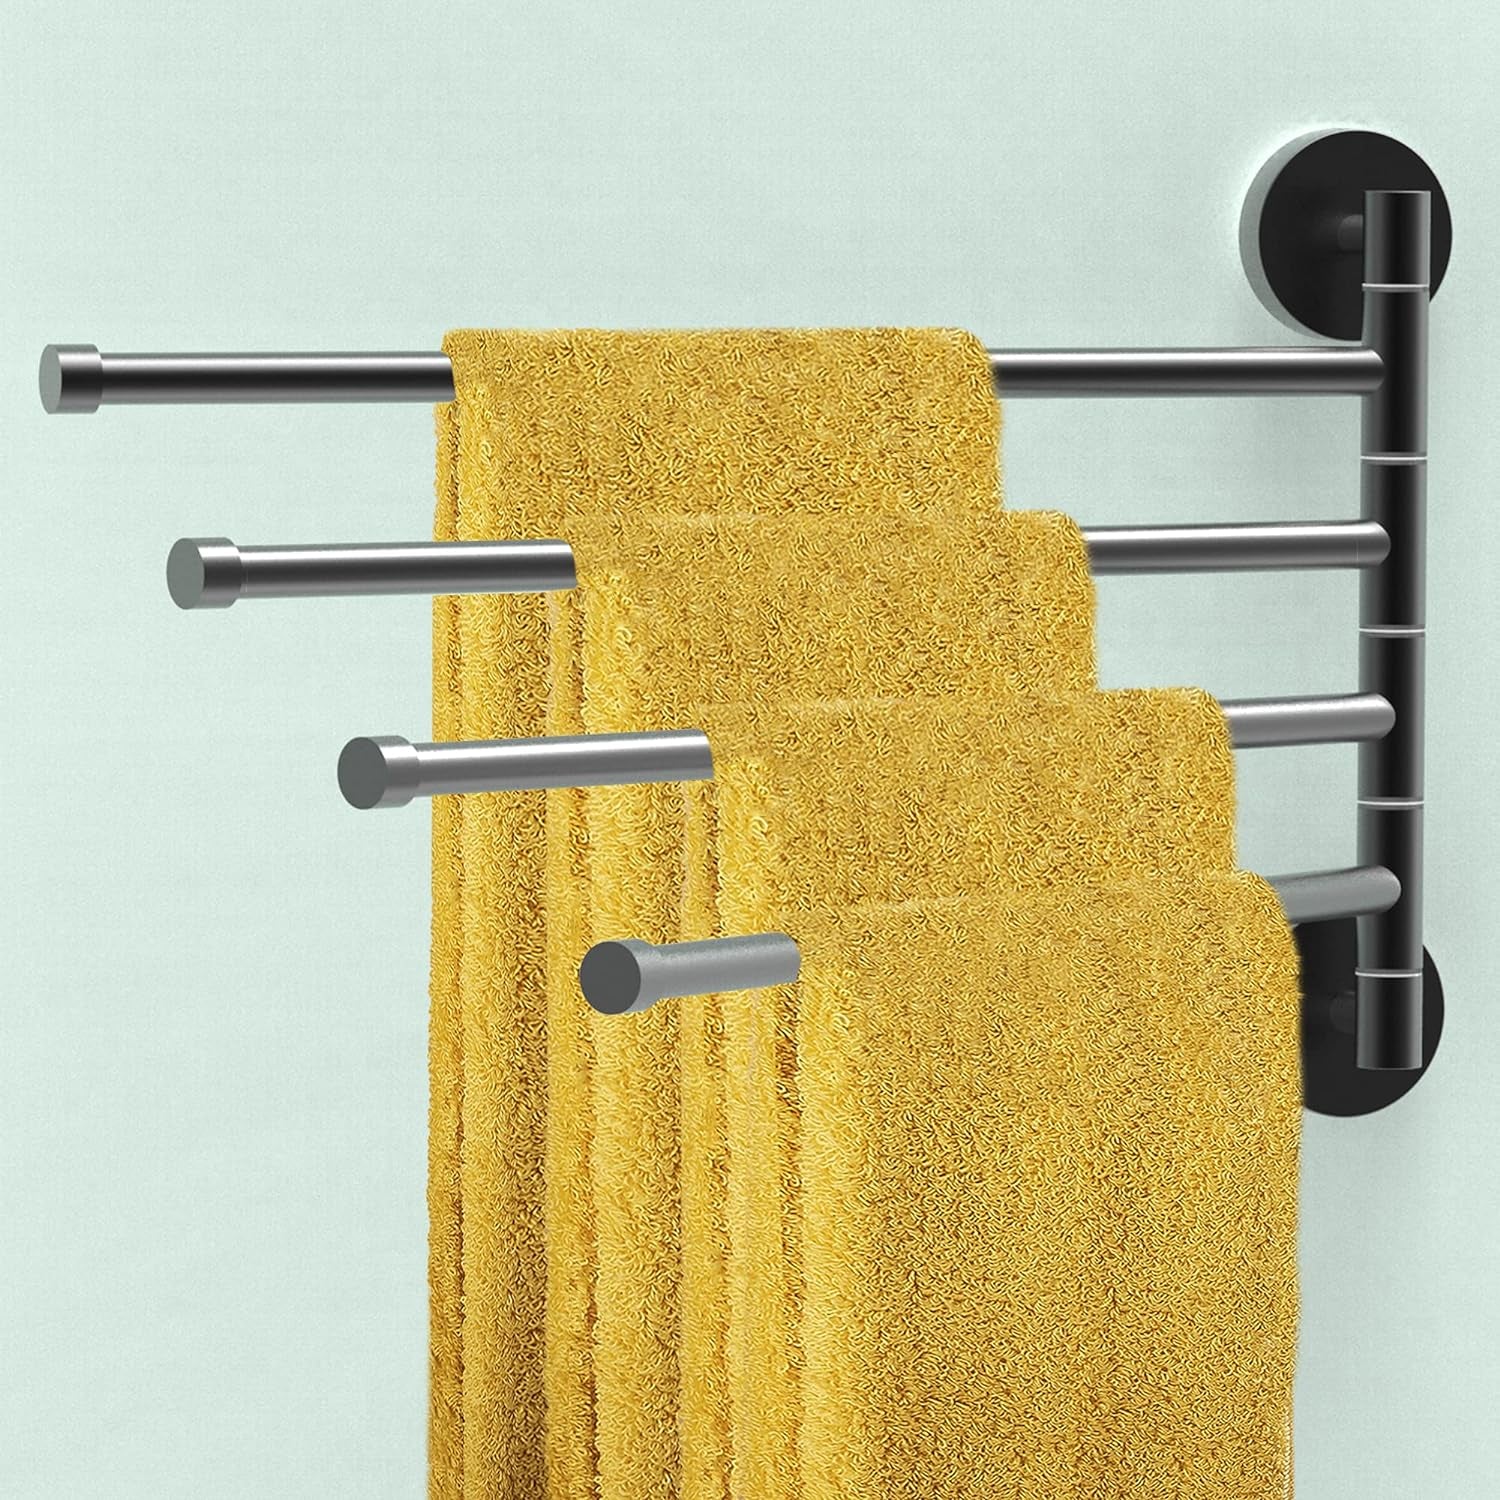 Swivel Towel Rack for Bathroom and Kitchen, Corrosion Resistant Stainless Steel Bars and Rods for Lifetime Use (Matte Black, 5-Arm)